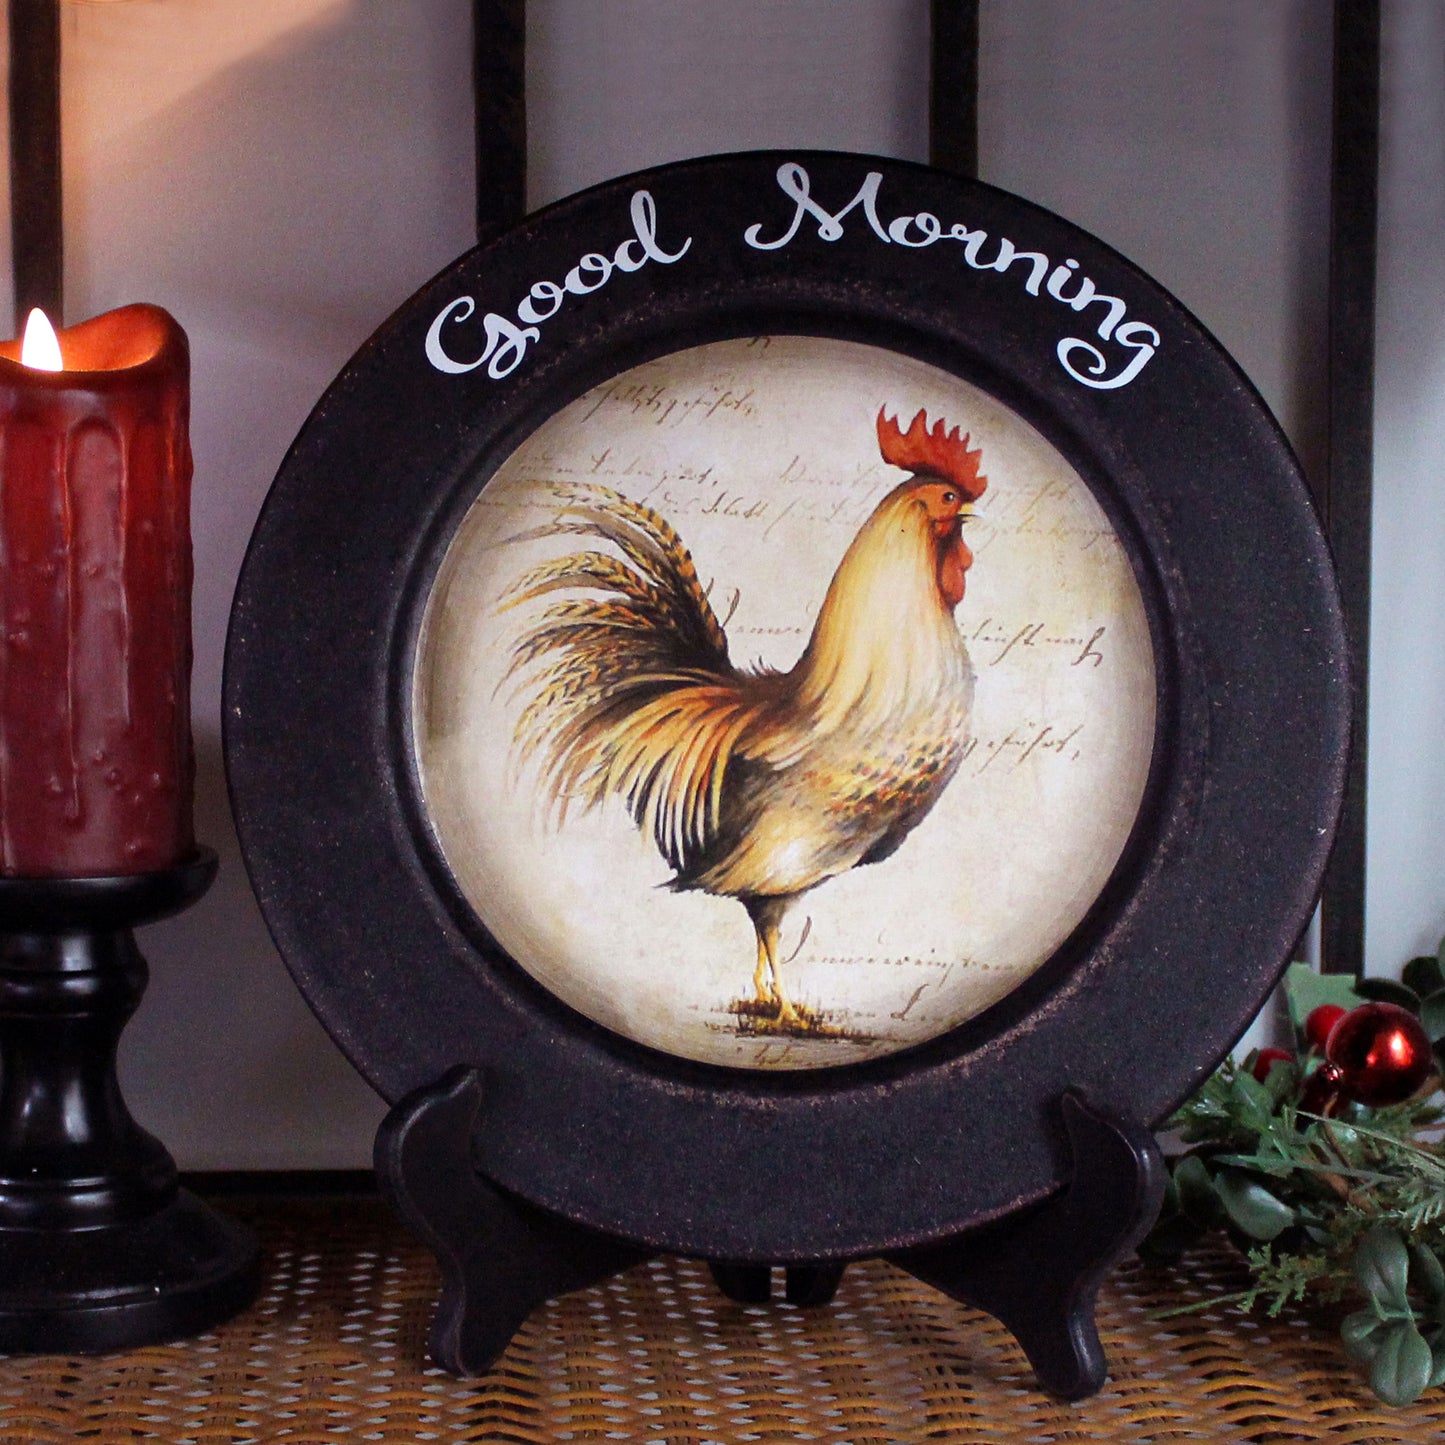 CVHOMEDECO. Rooster Decorative Plate Country Distressed Round Display Wooden Plate Home Décor Art, 11.25 Inch